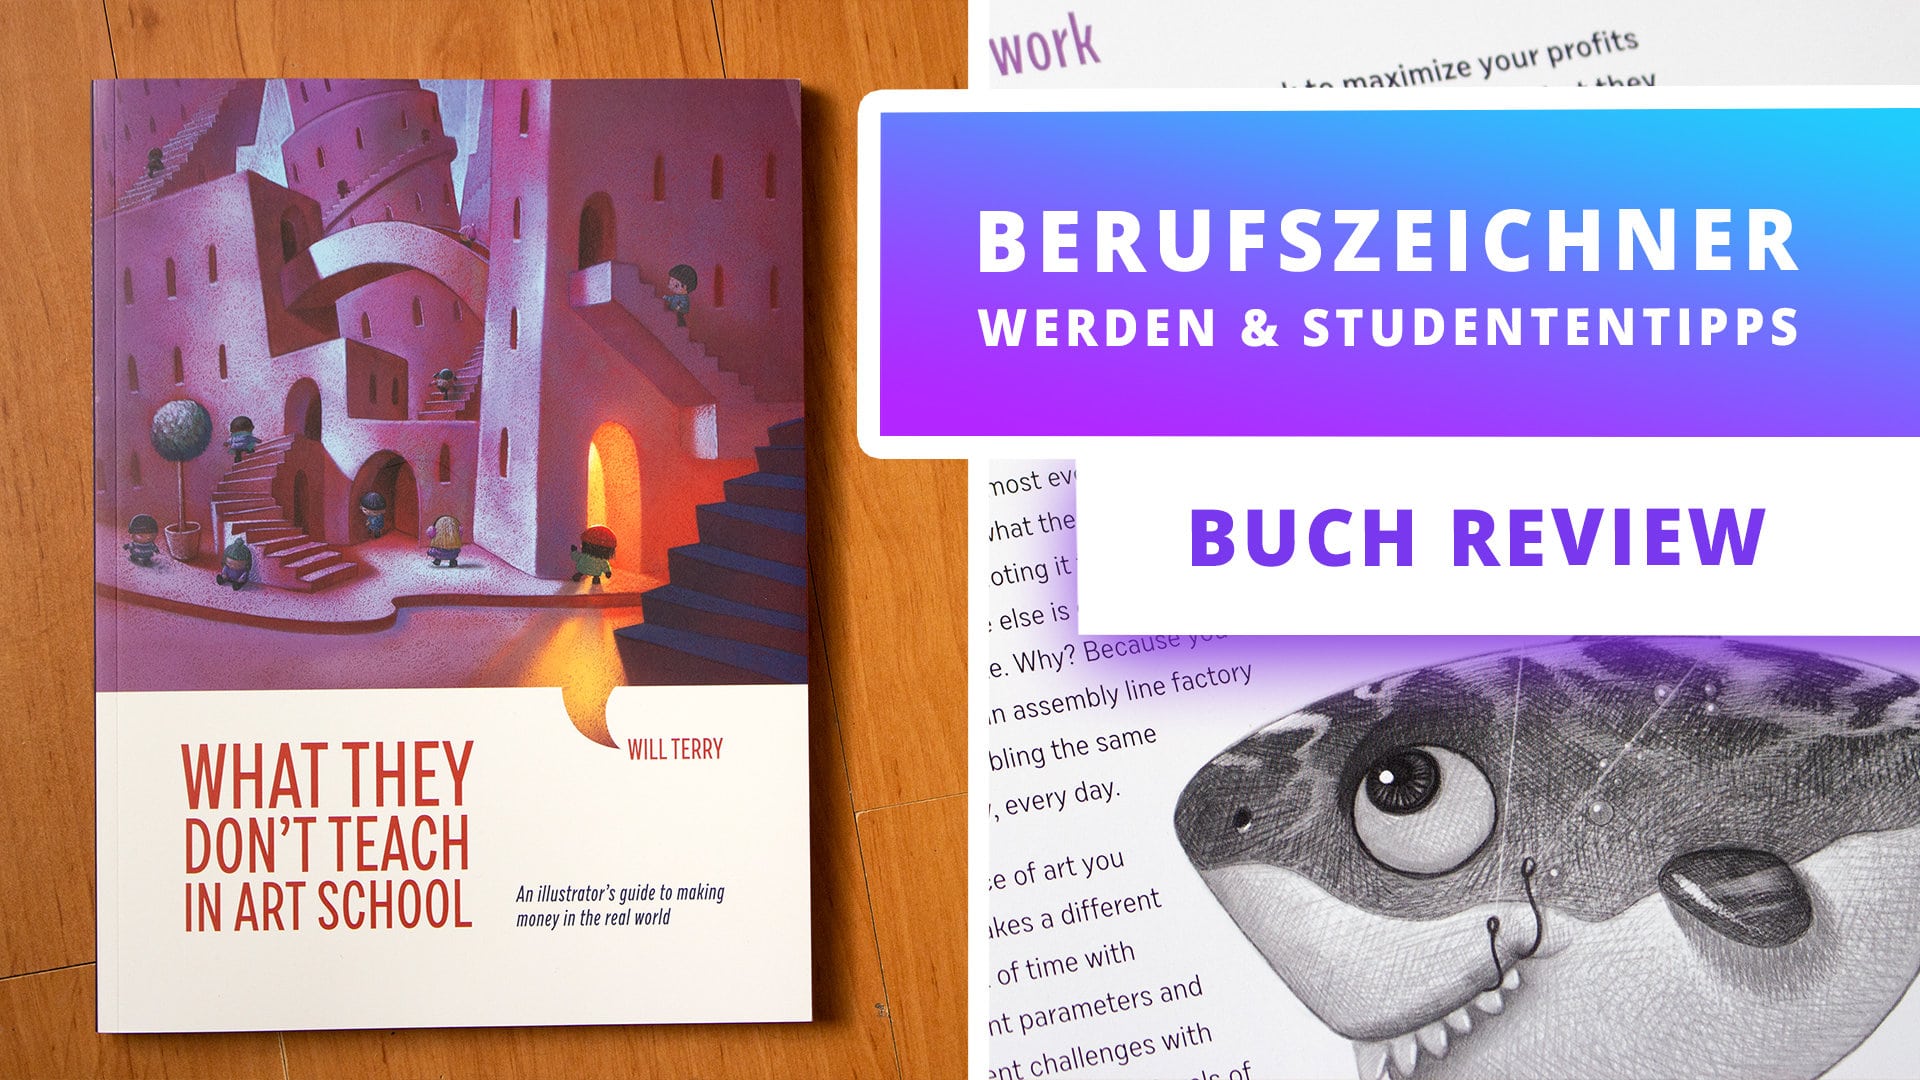 What they don’t teach you in art school [Buch Review]